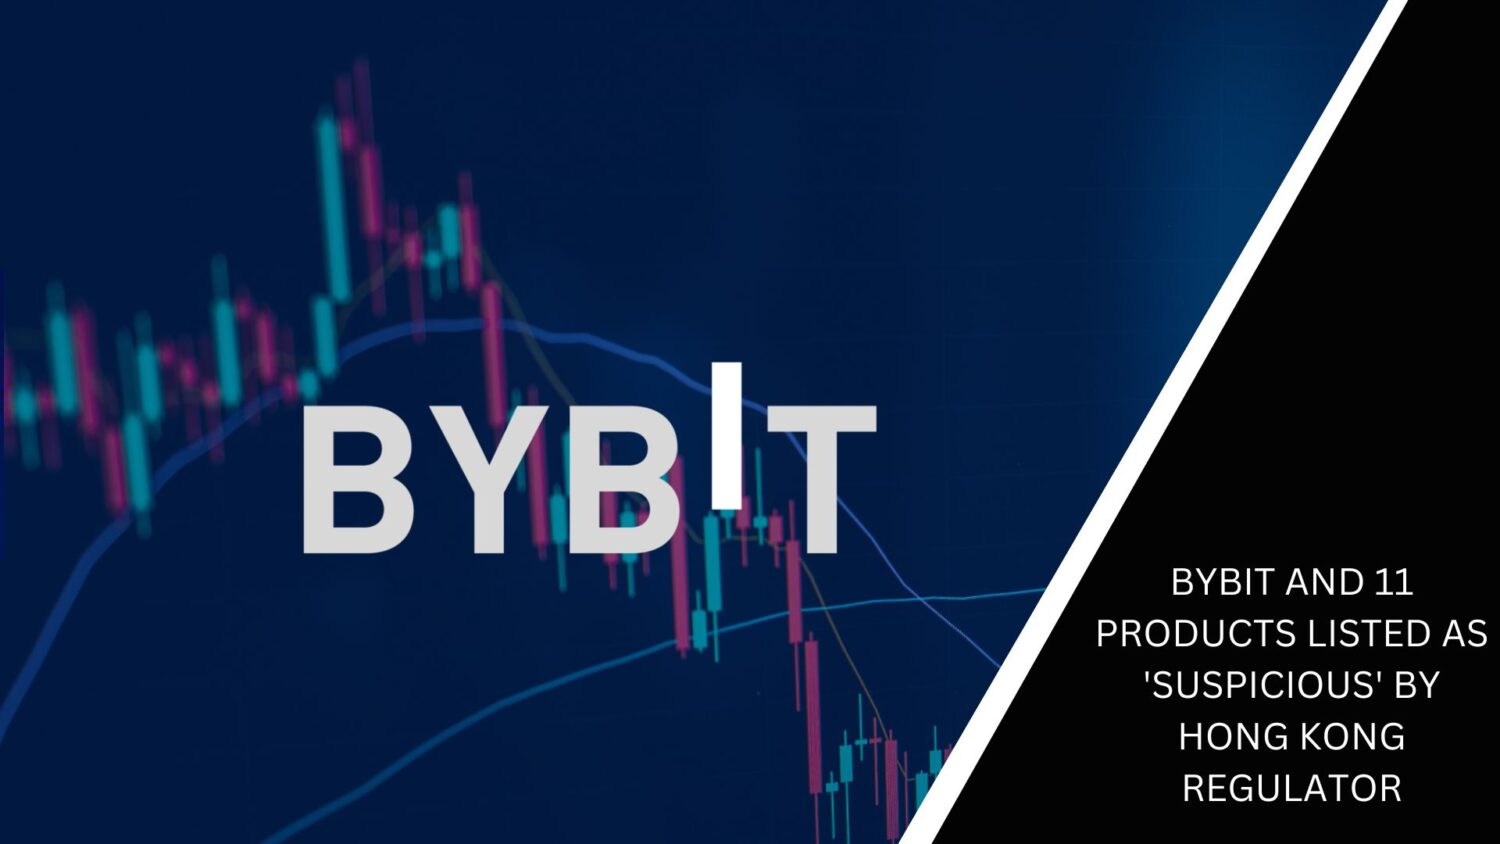 Ong Kong Sfc Has Issued A Warning Against Unlicensed Virtual Asset Trading Platform Bybit